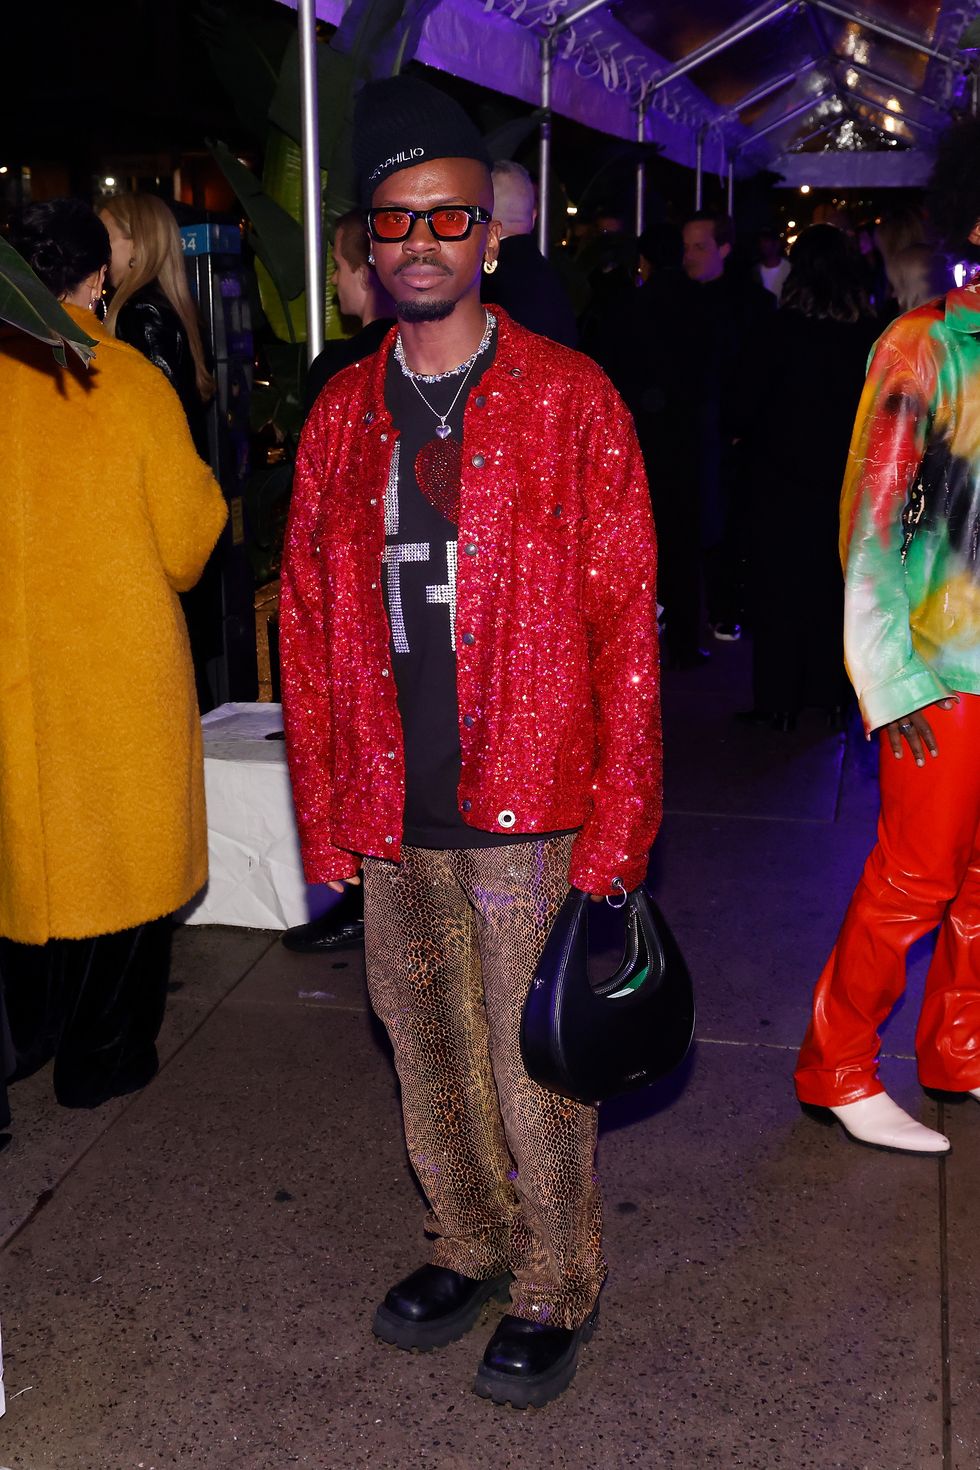 Gucci in Meatpacking